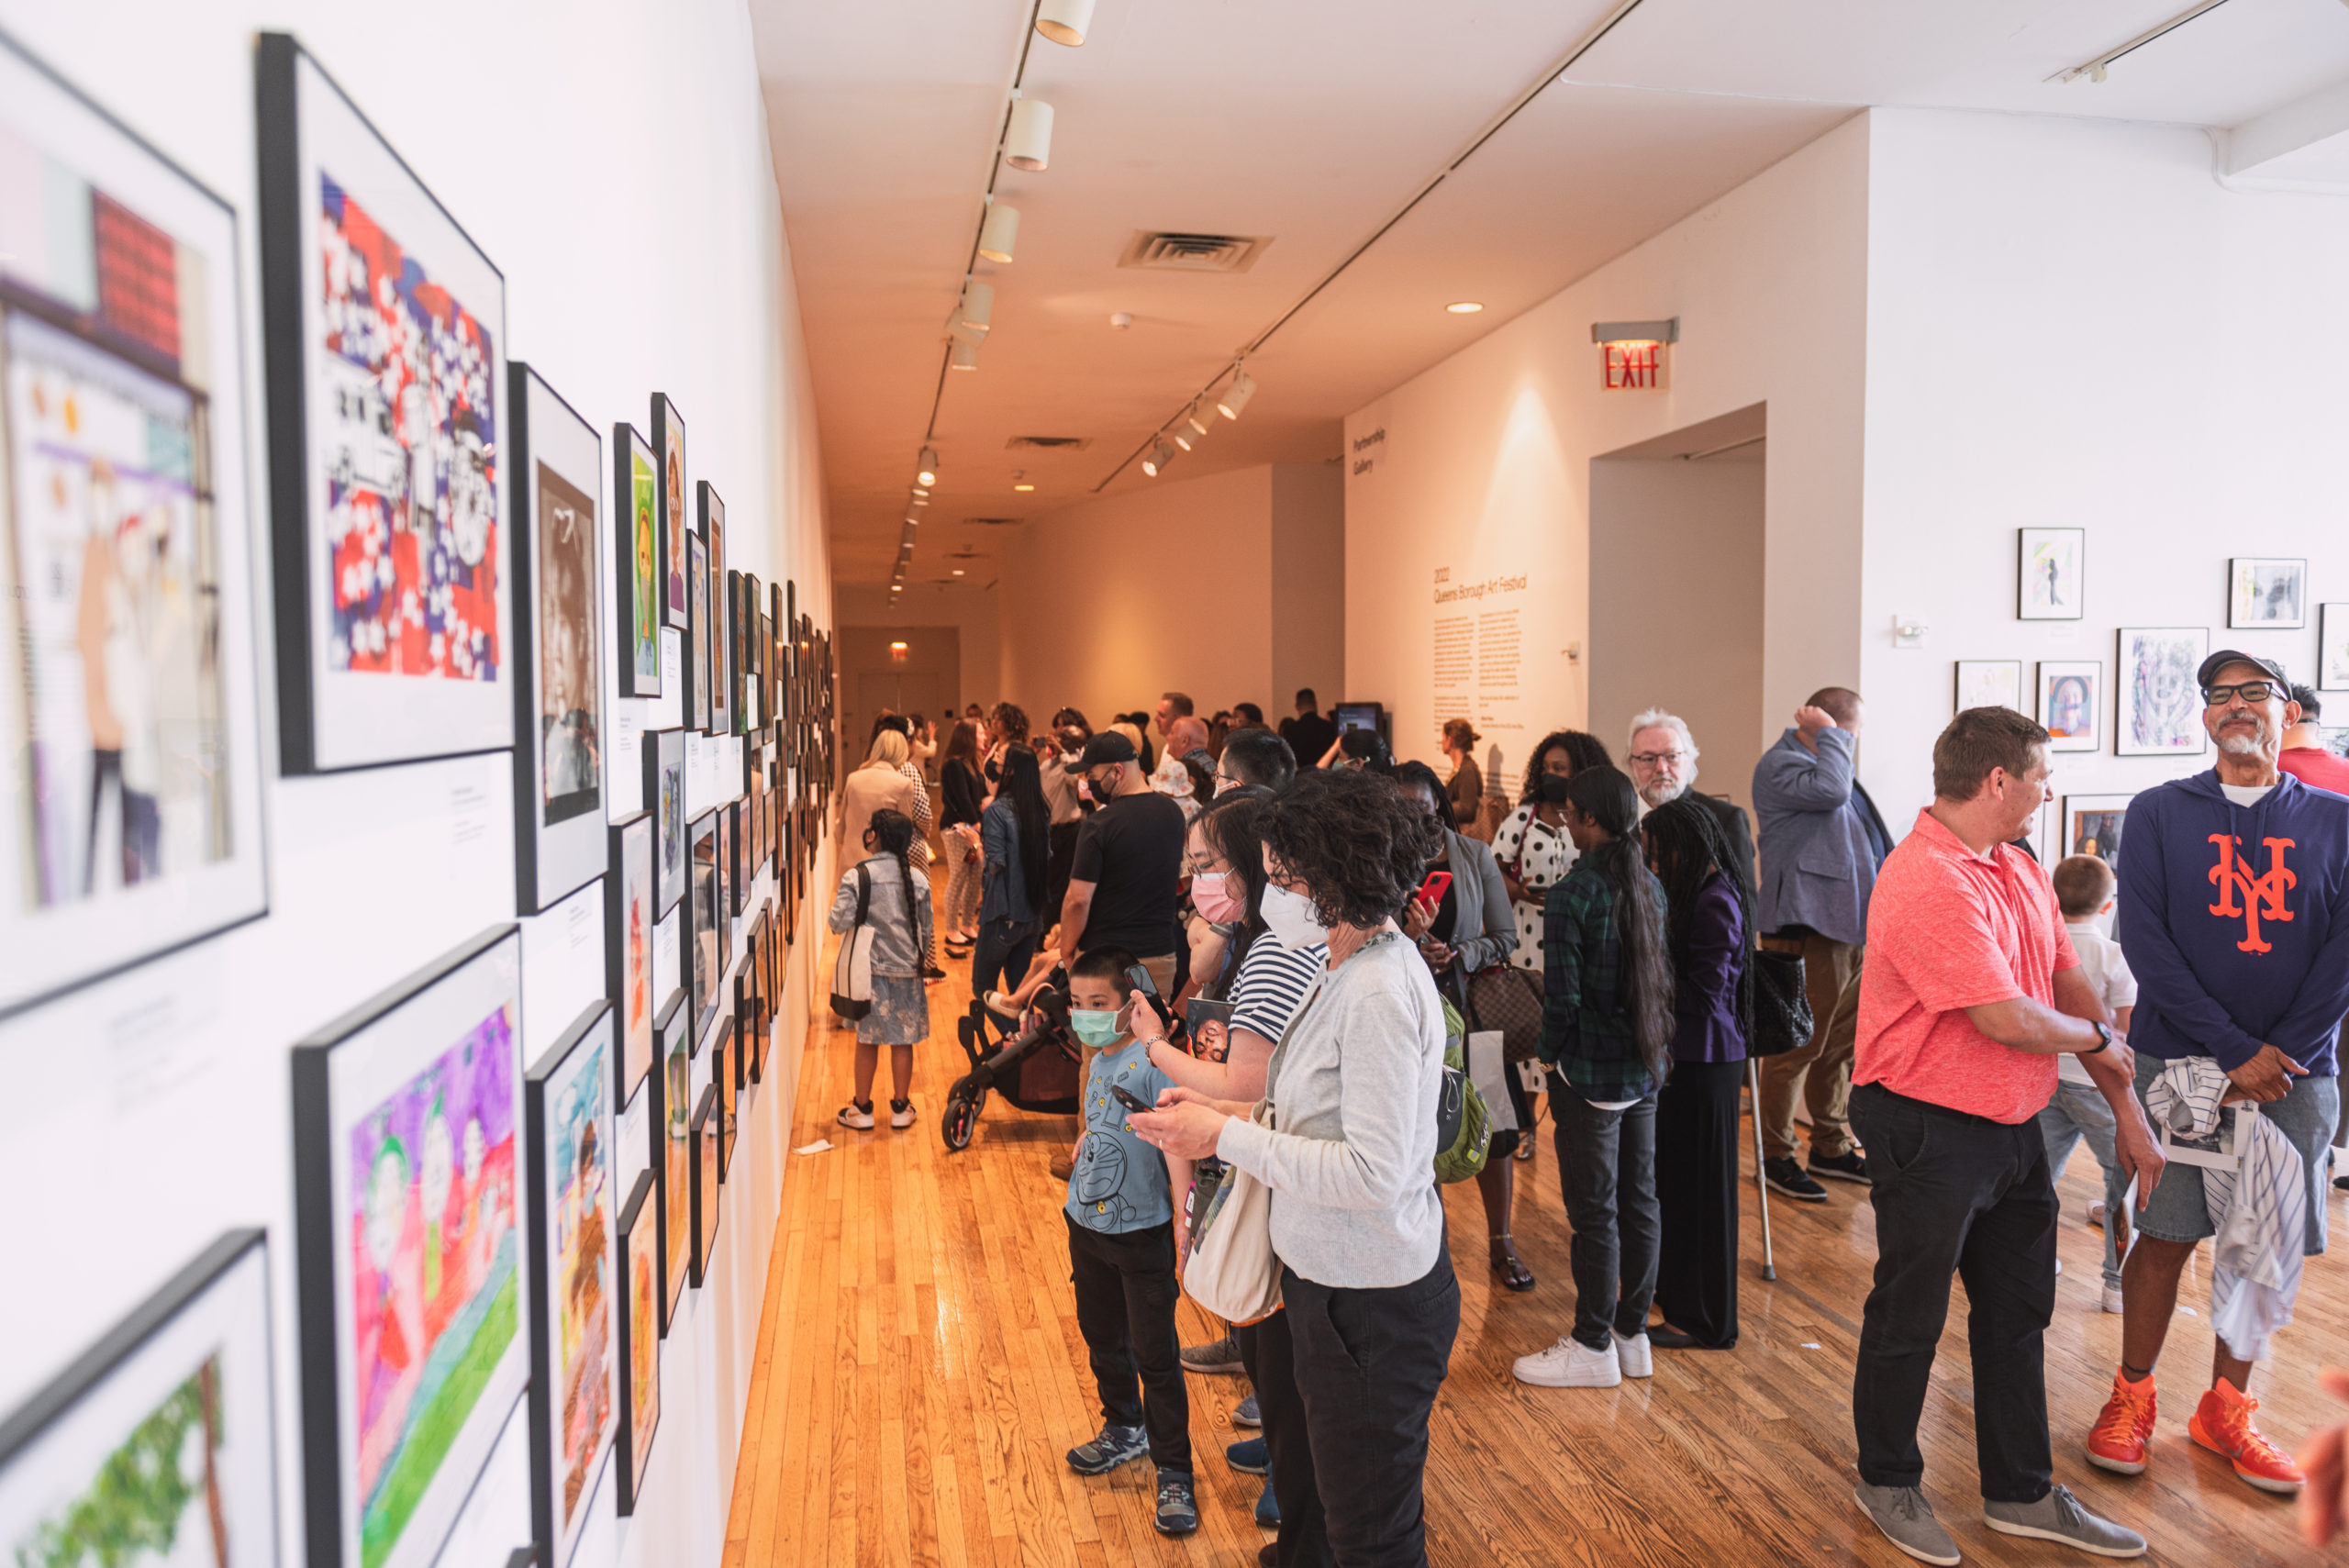 A narrow walkway in an exhibition space, filled with visitors of different races and ages. On the left is a wall full of framed artworks, installed salon style. 